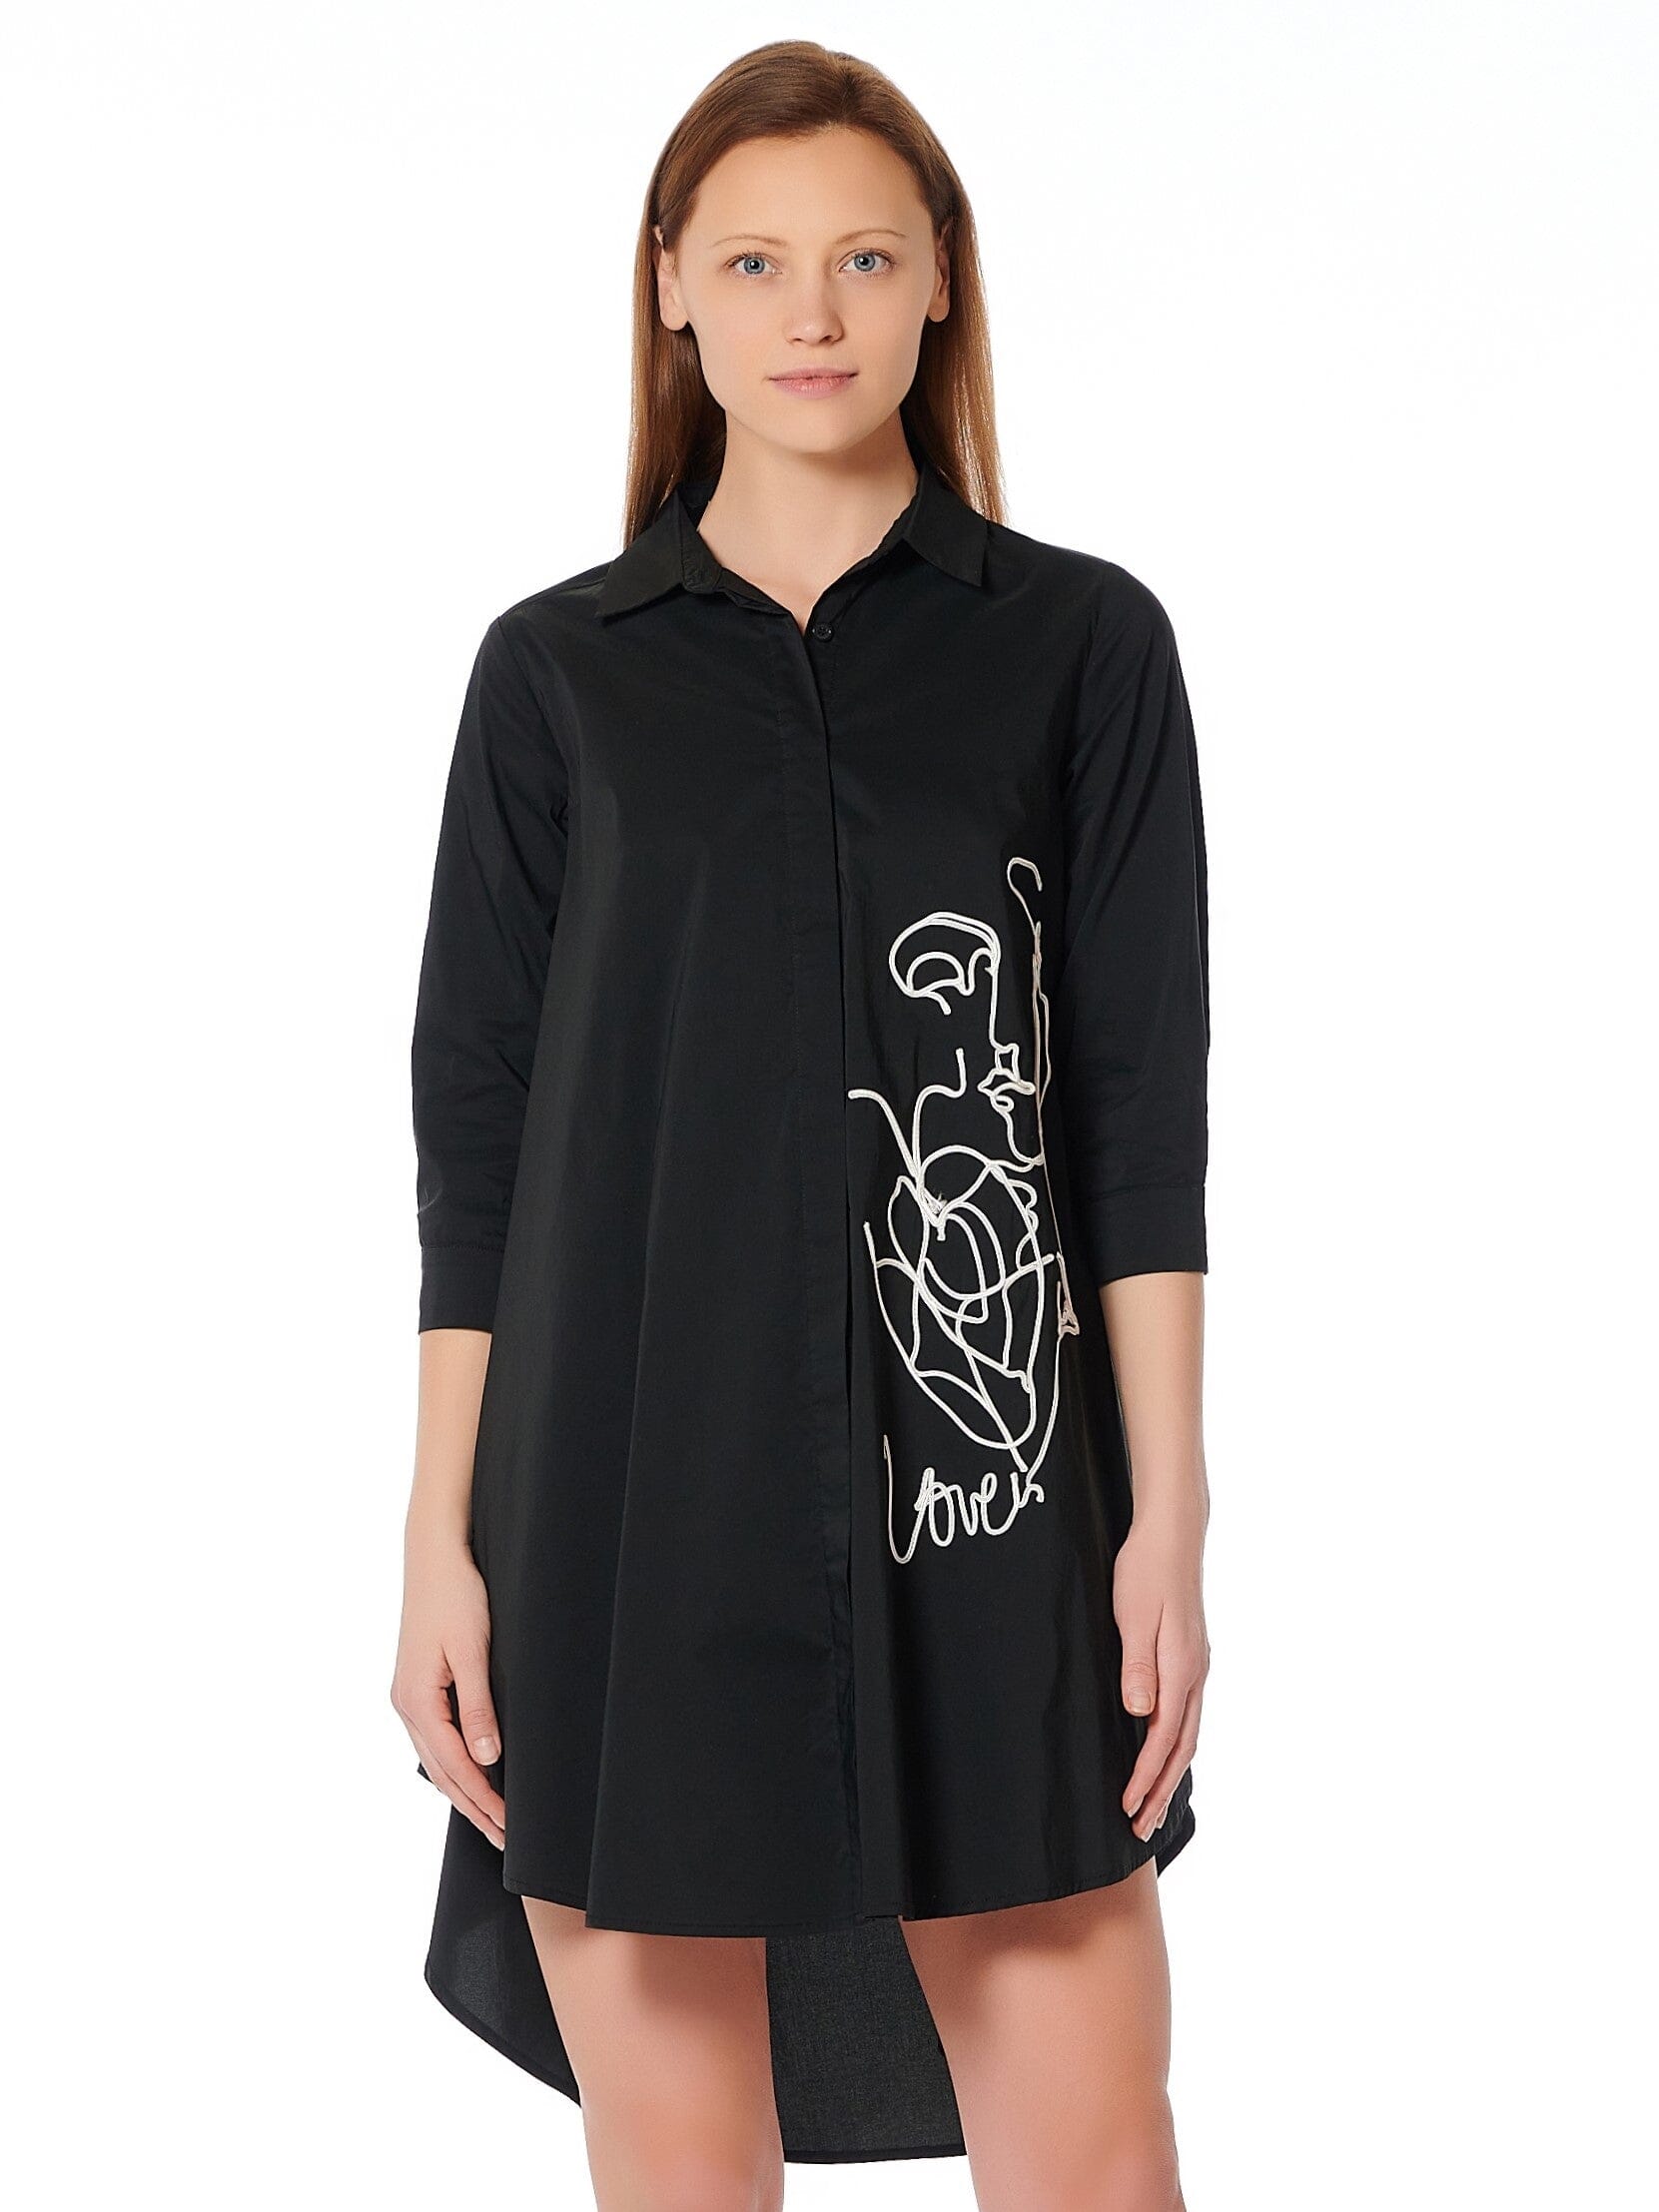 Modern Line Art Face Embroidered Collared Tunic TOP Gracia Fashion BLACK S 